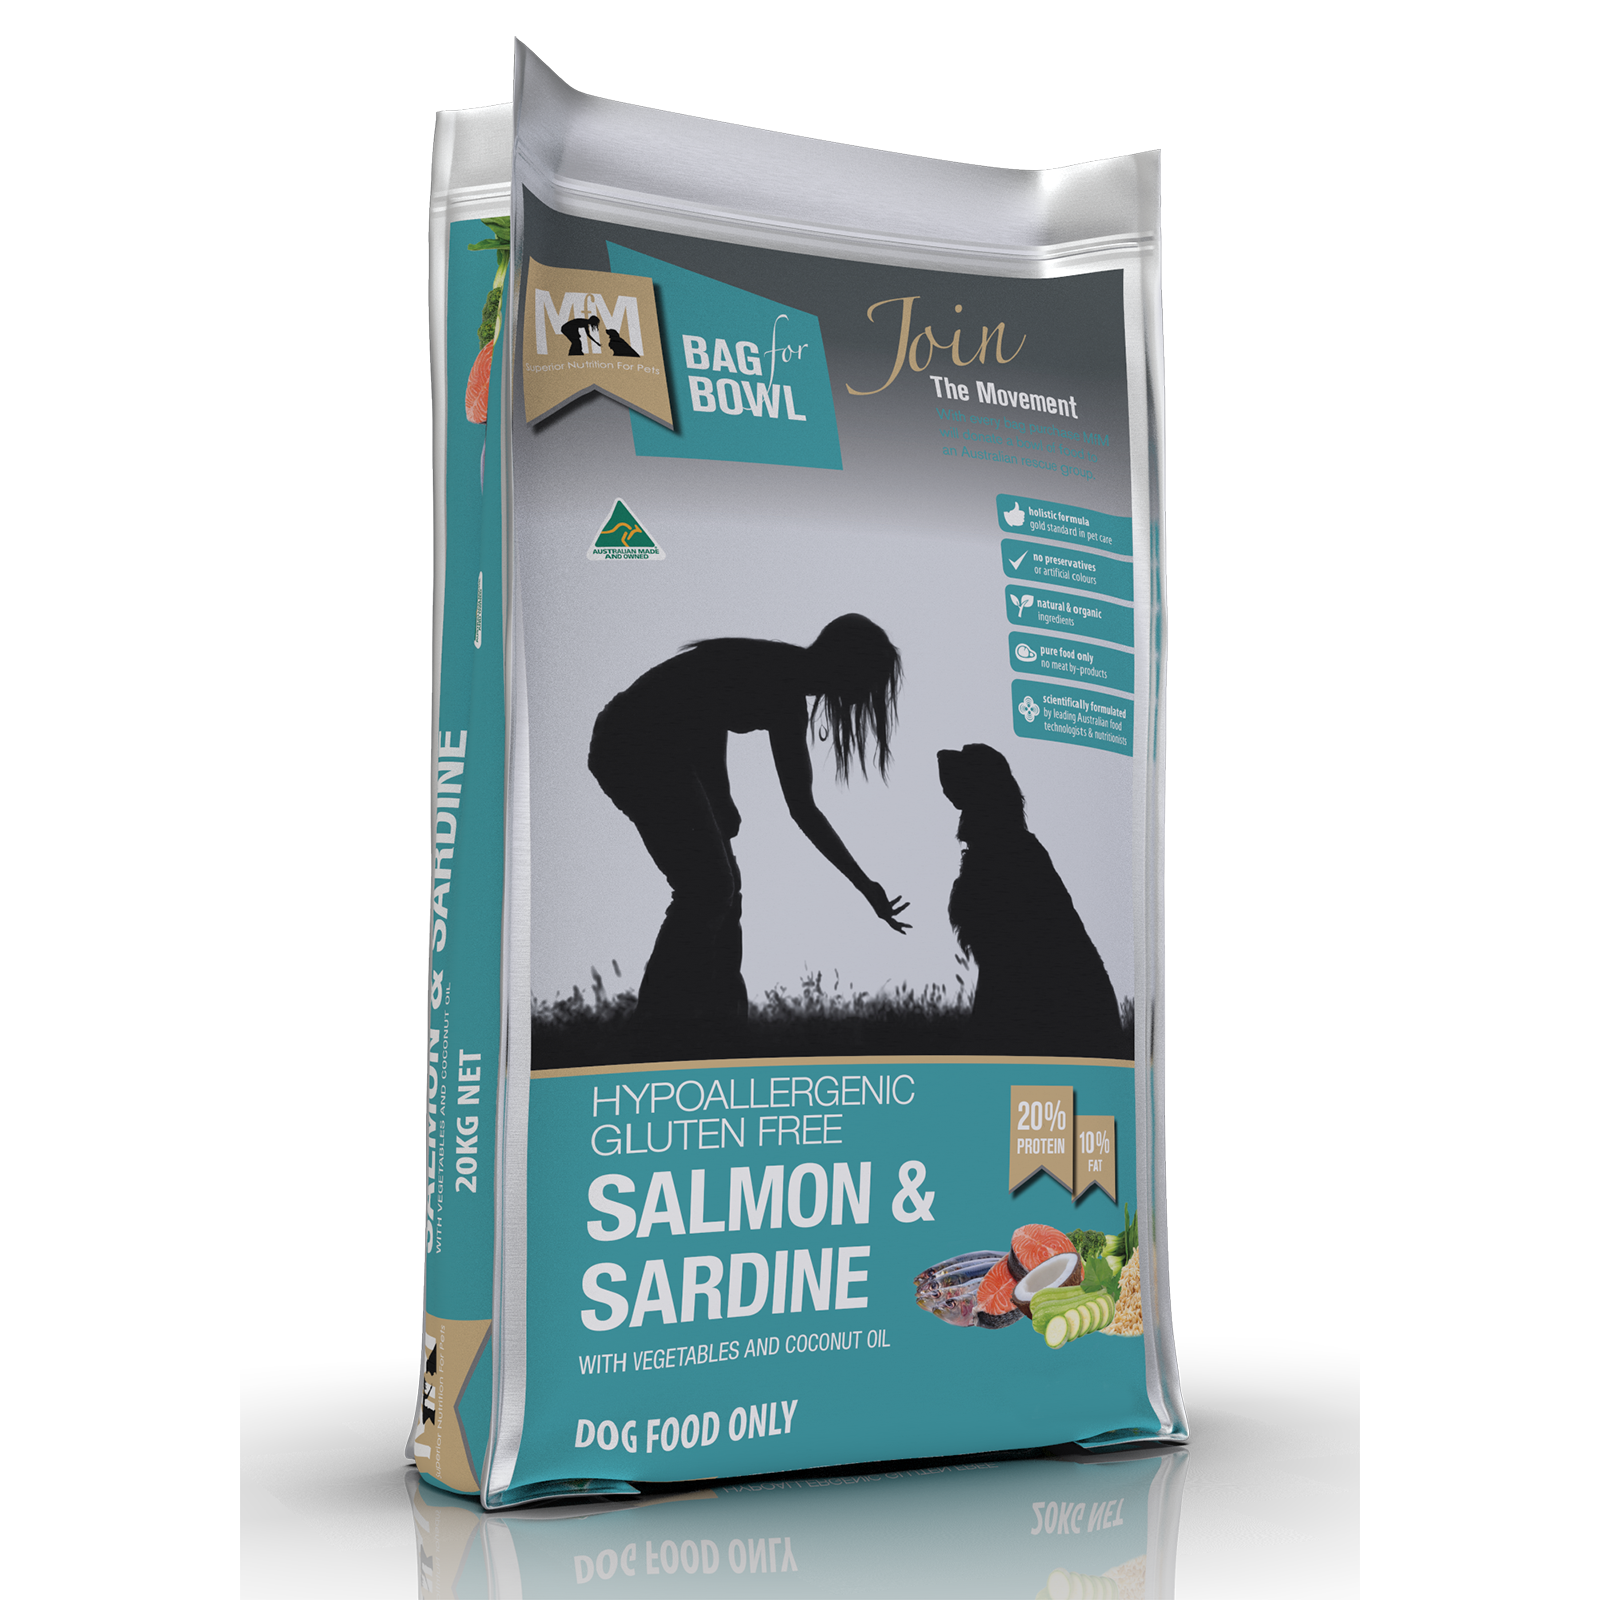 Meals For Mutts Dog Food Adult Salmon & Sardine